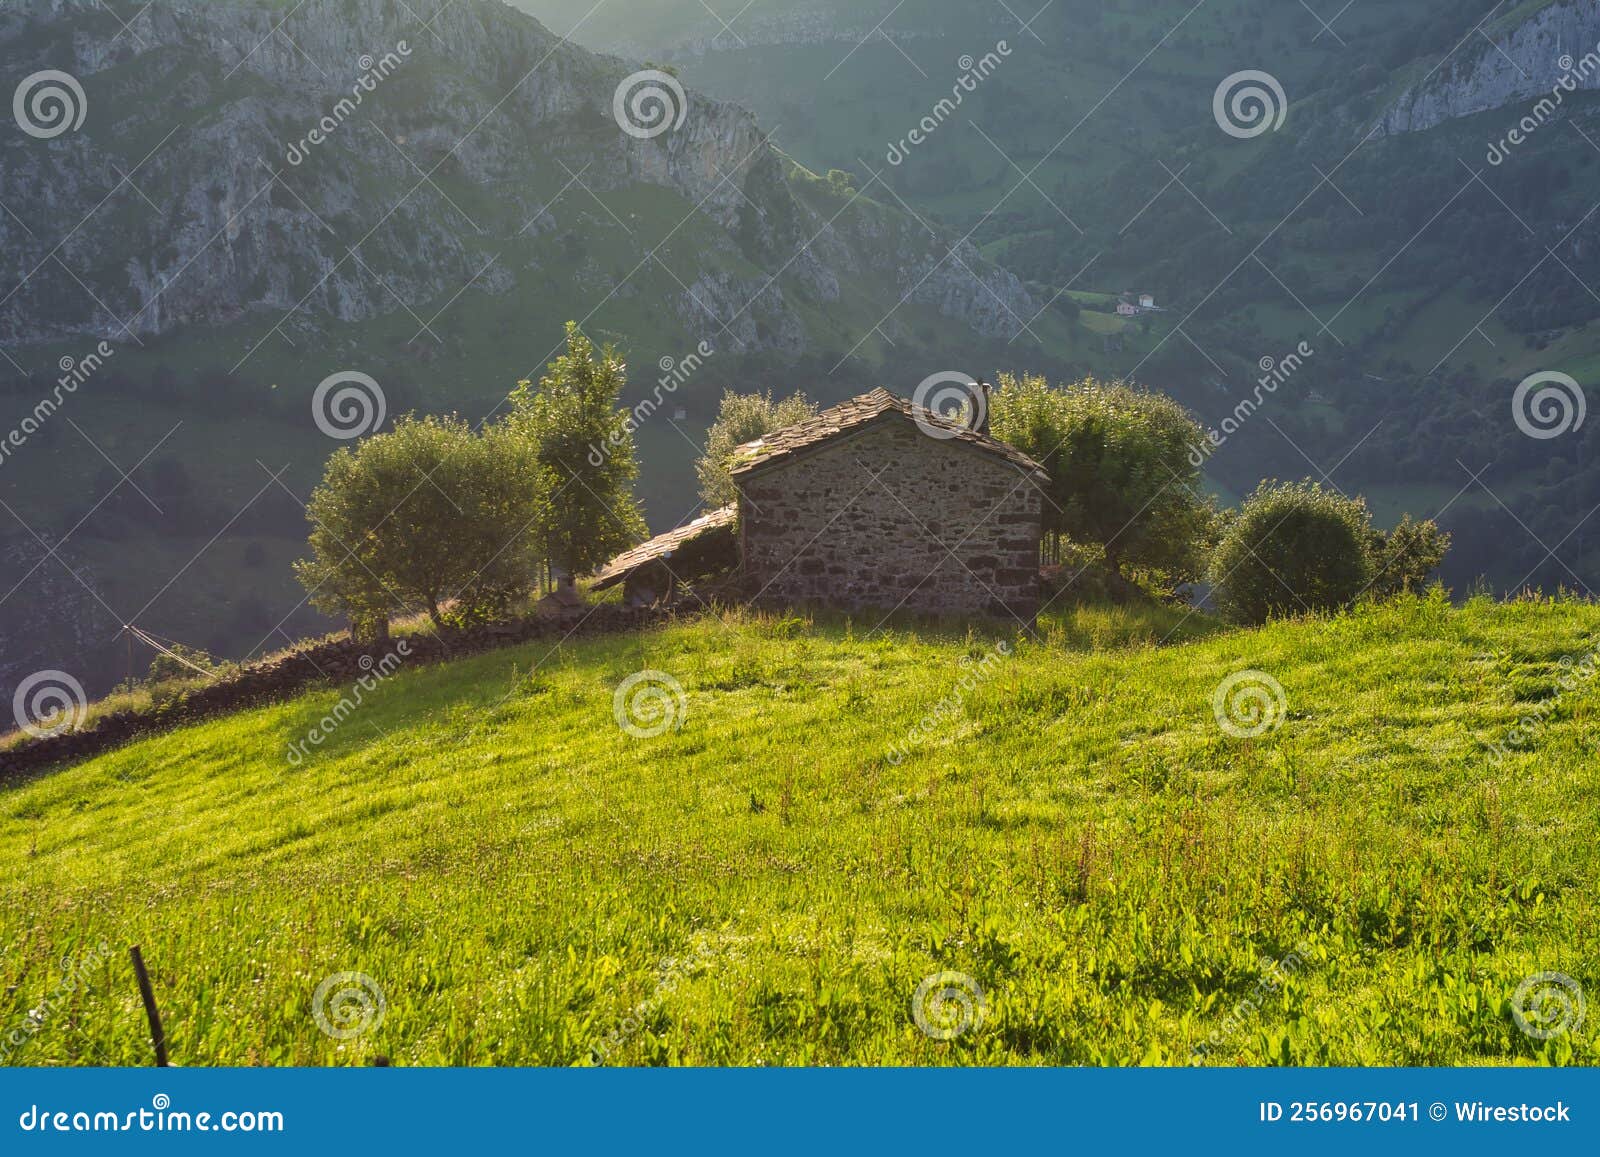 aerial view of a rural house on a field in valles pasiegos, picos de europa, cantabria